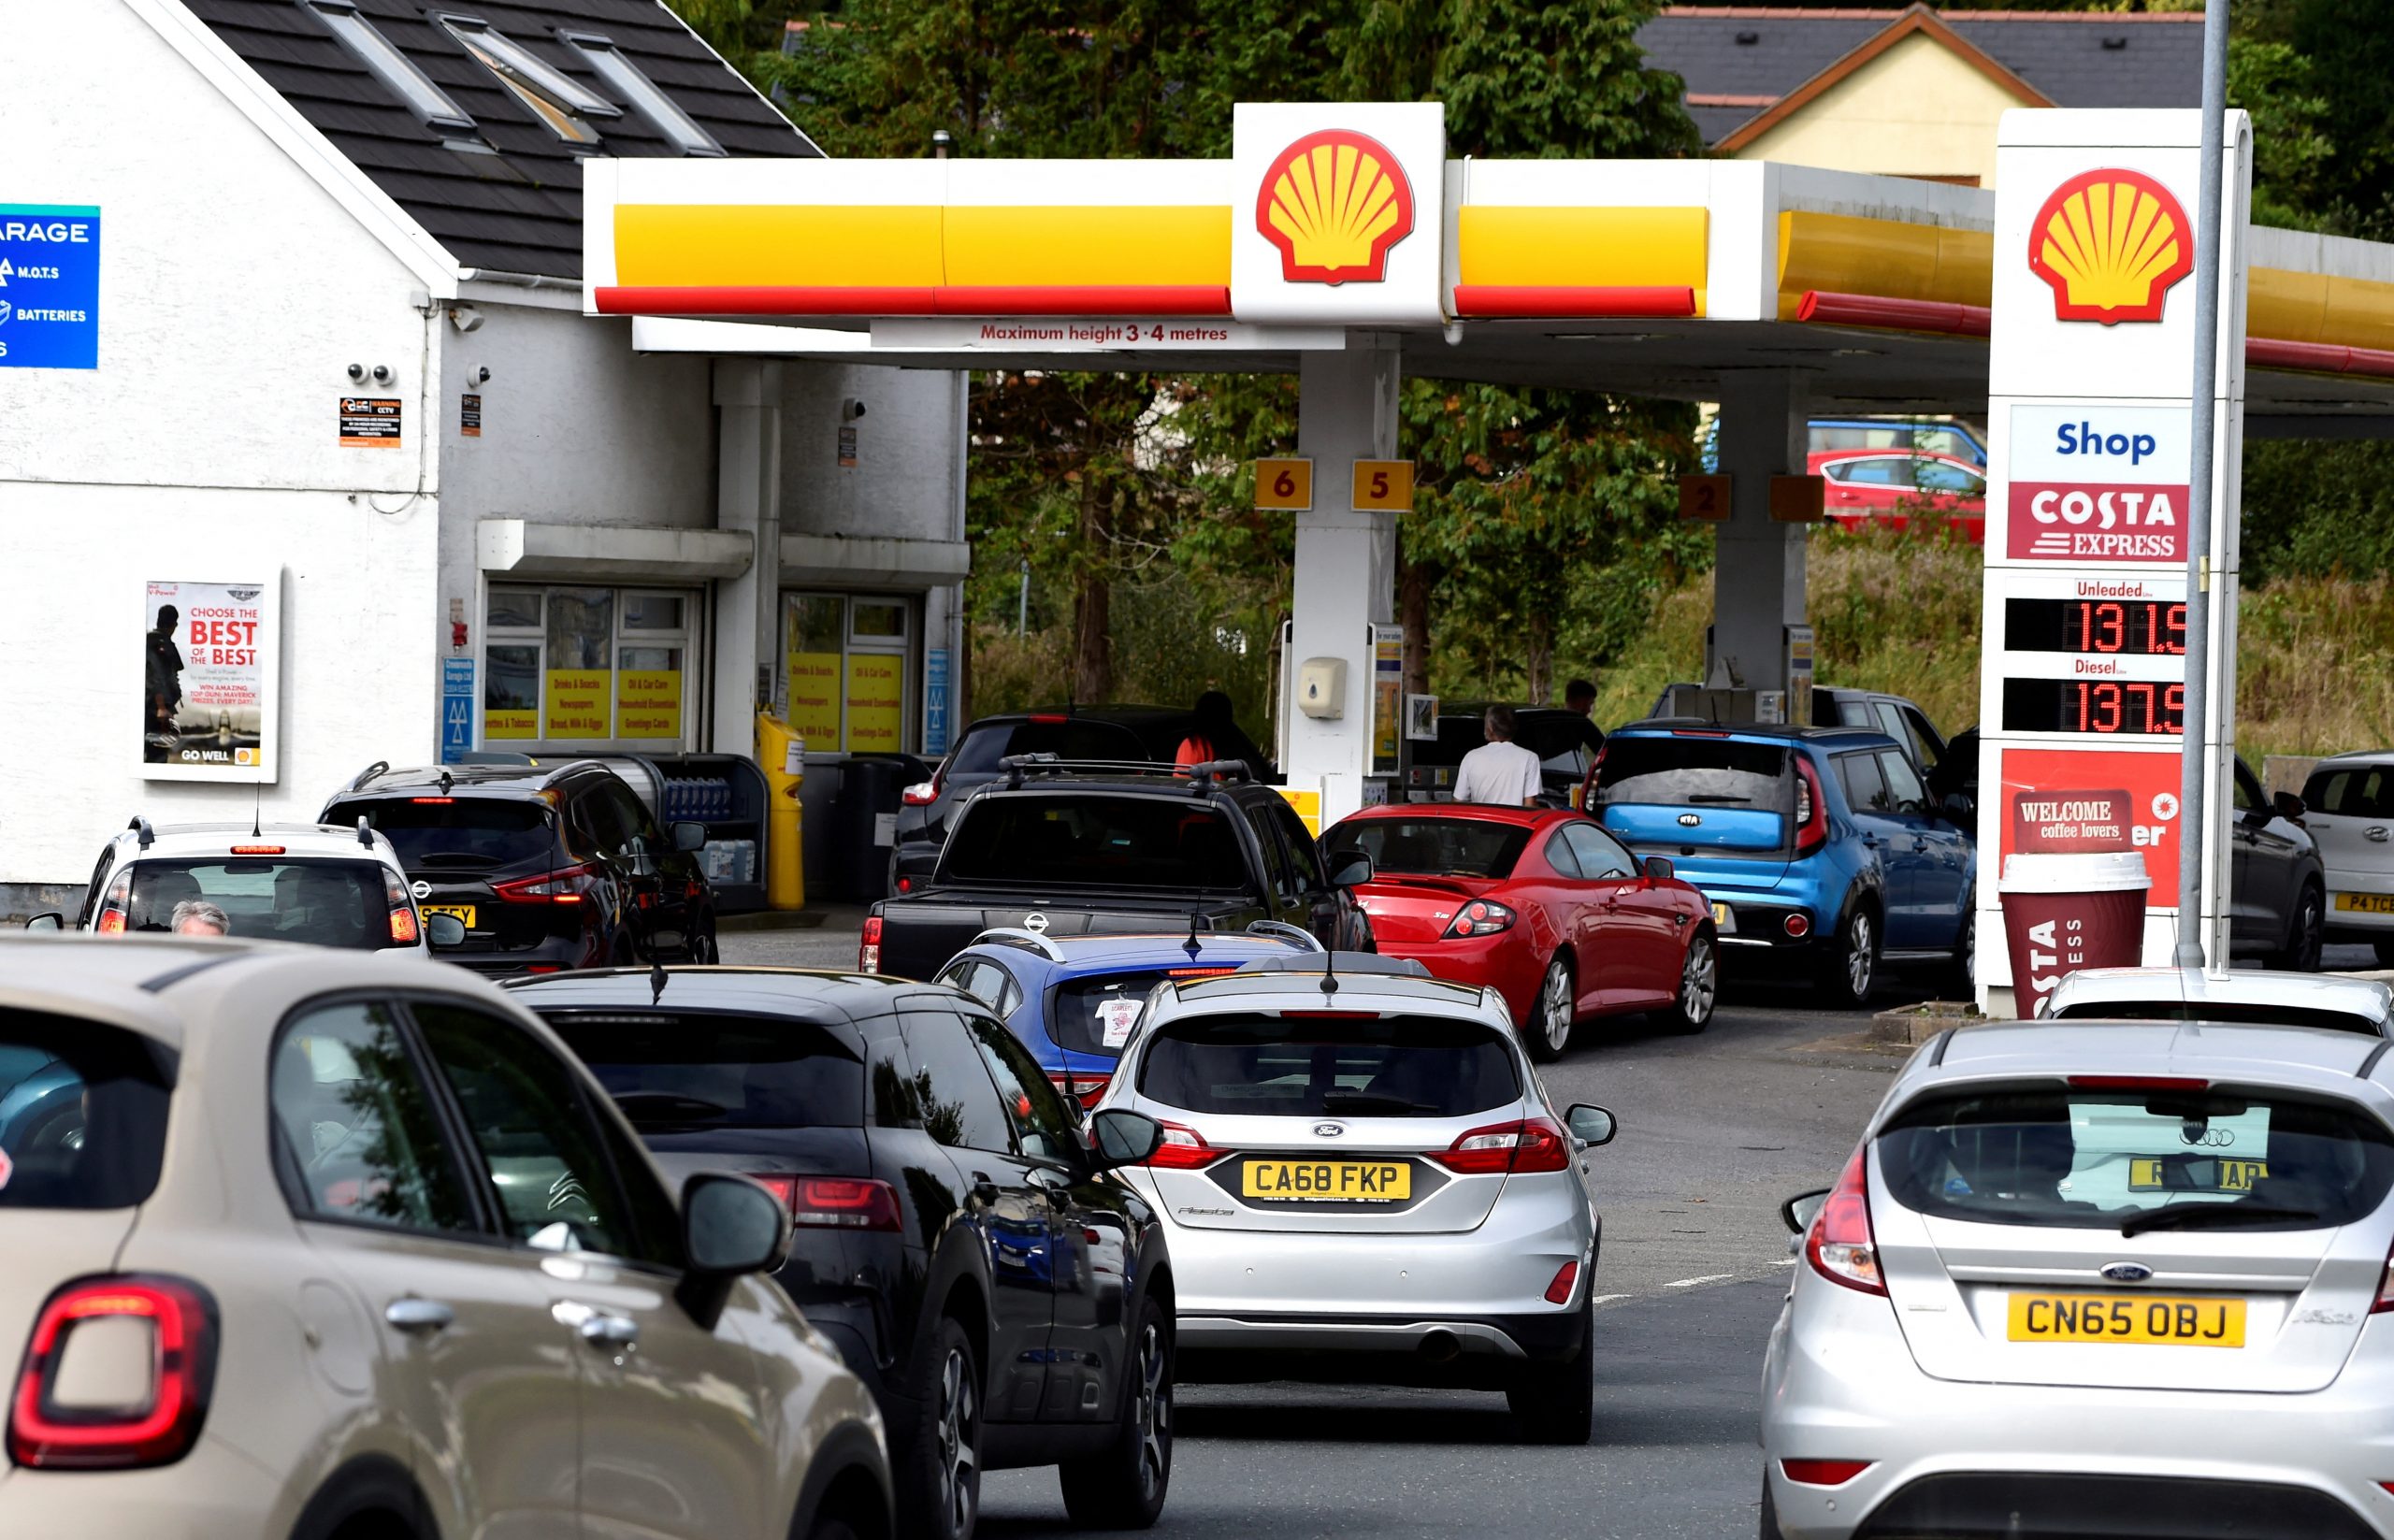 Industry body reports spike in fuel theft, drive-off, verbal abuse towards forecourt staff